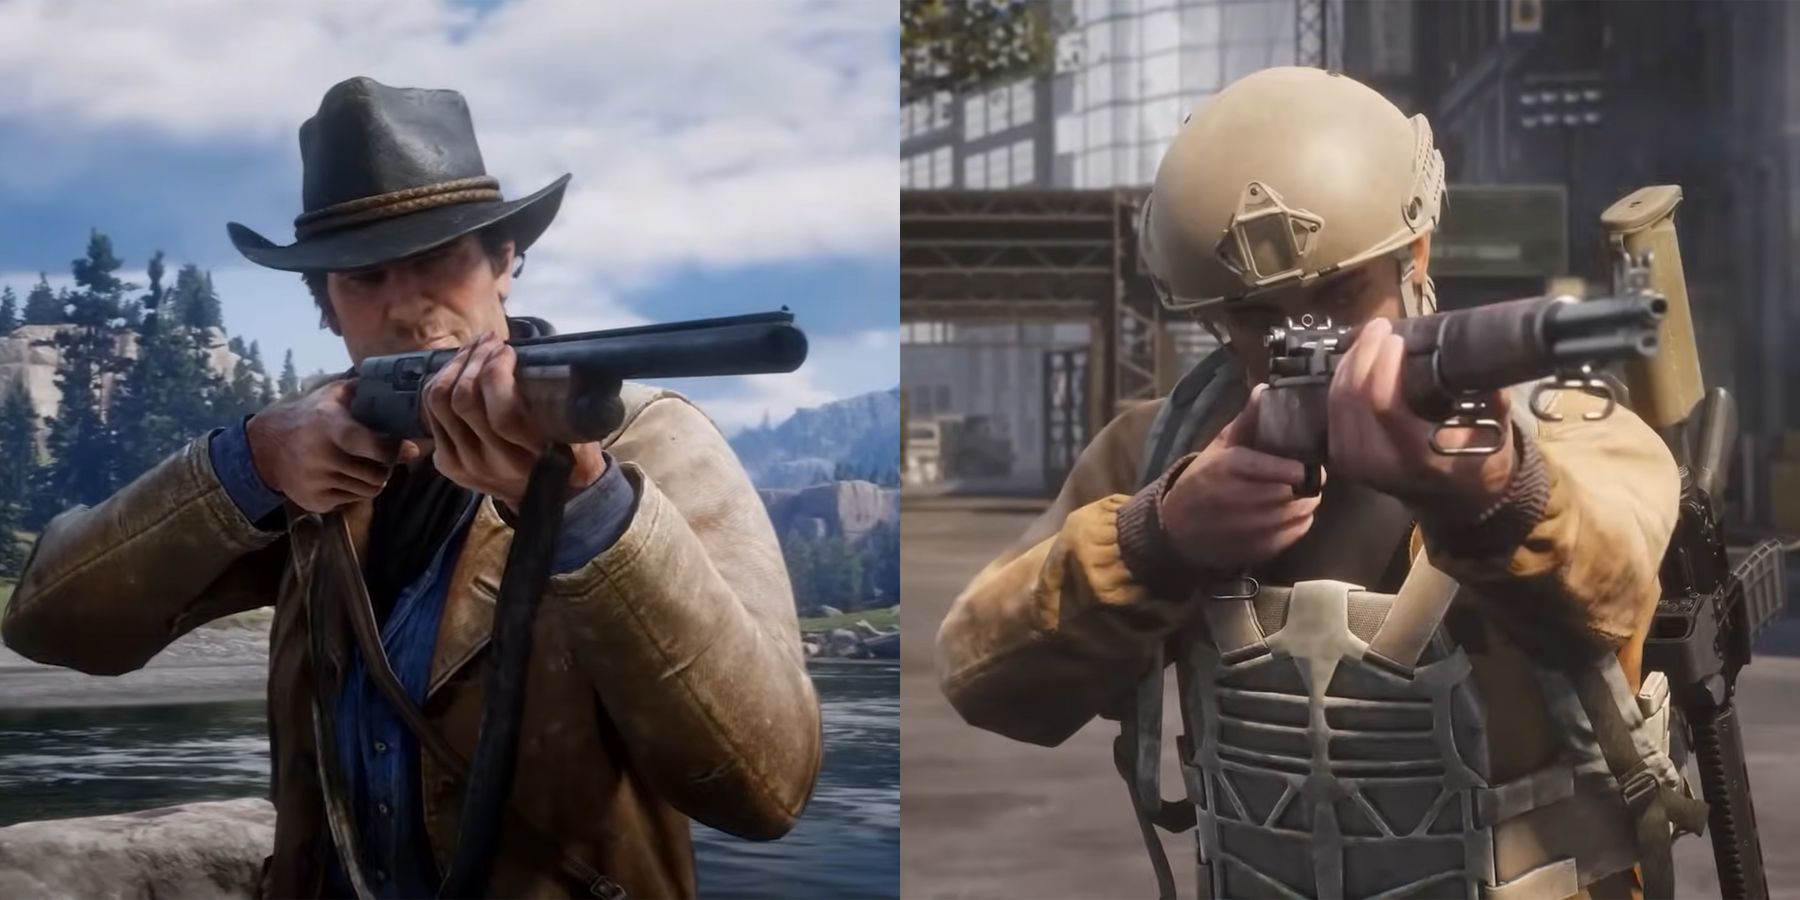 The Day Before' Is Being Accused of Copying From 'Call of Duty